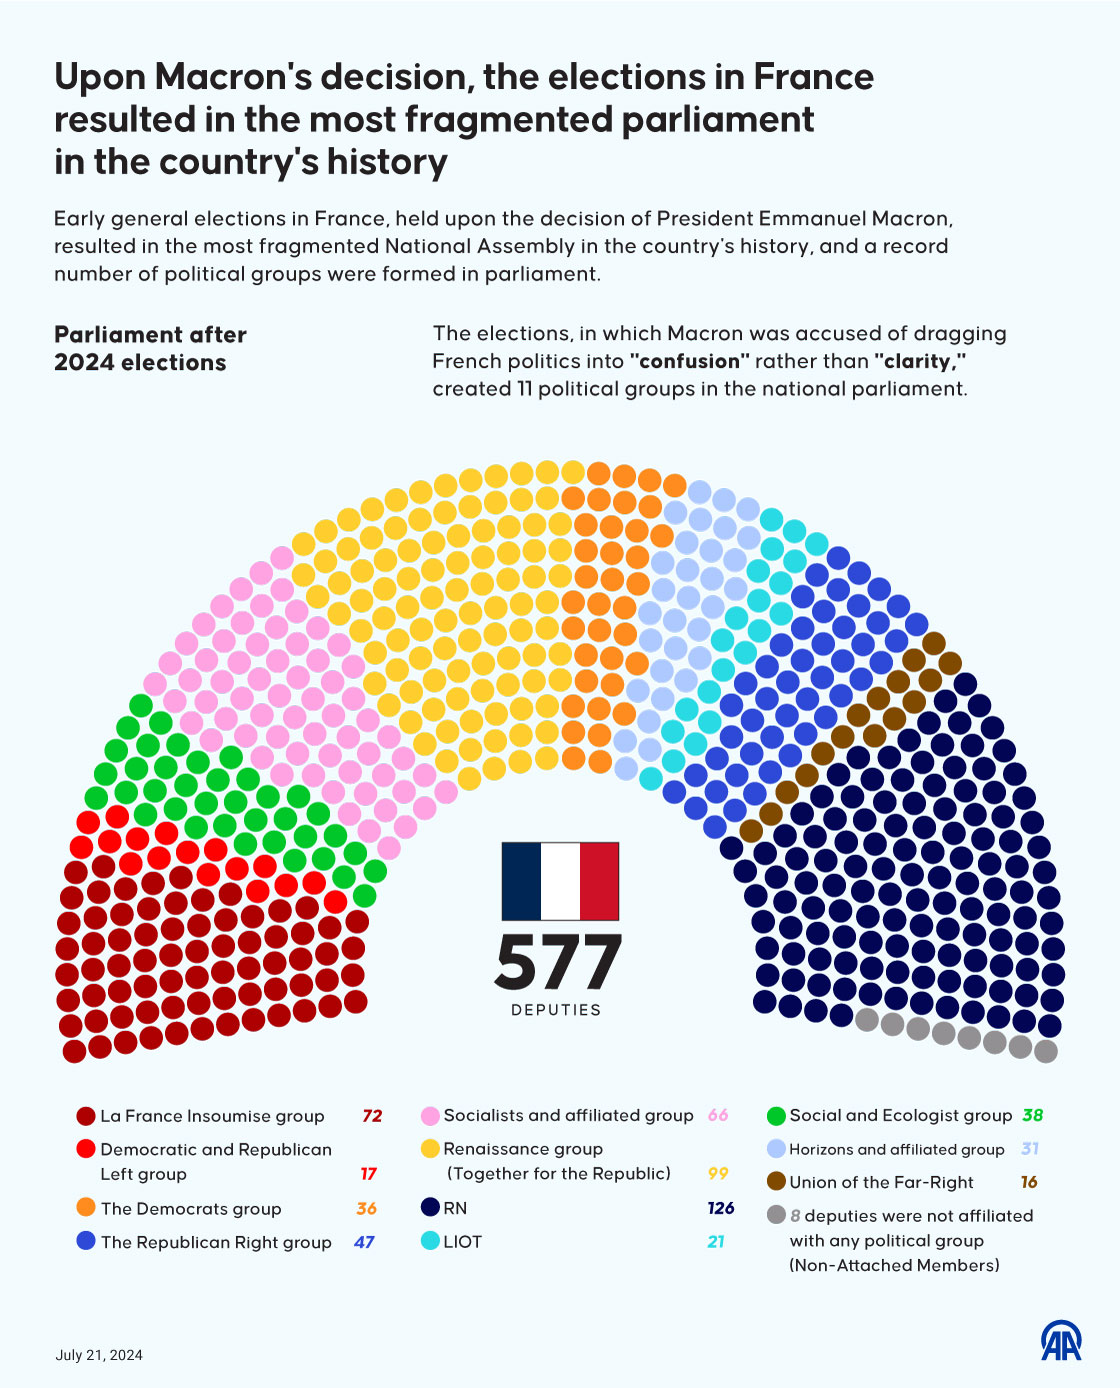 Upon Macron's decision, the elections in France resulted in the most fragmented parliament in the country's history.